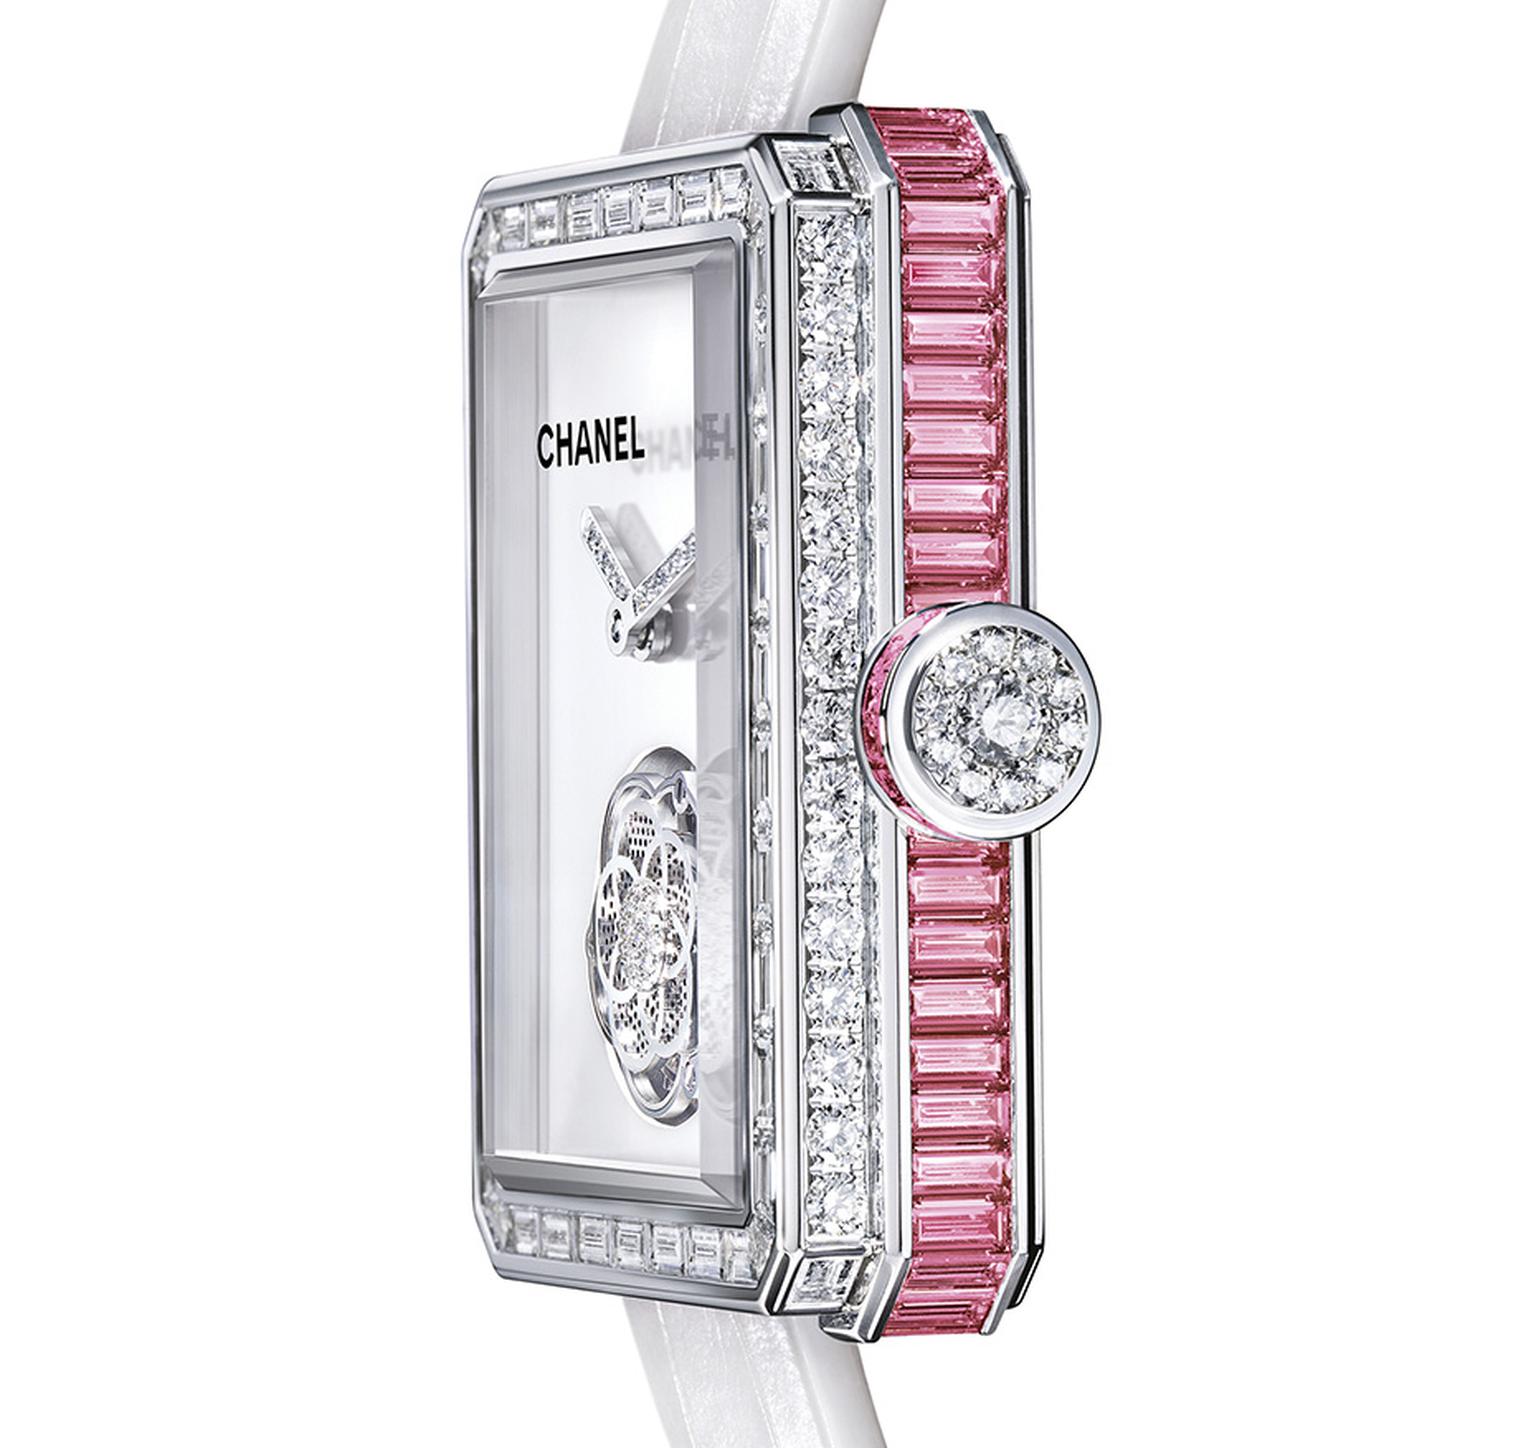 Chanel's new Première Flying Tourbillon watch for 2014 in white gold is set with 169 diamonds and 63 pink sapphires